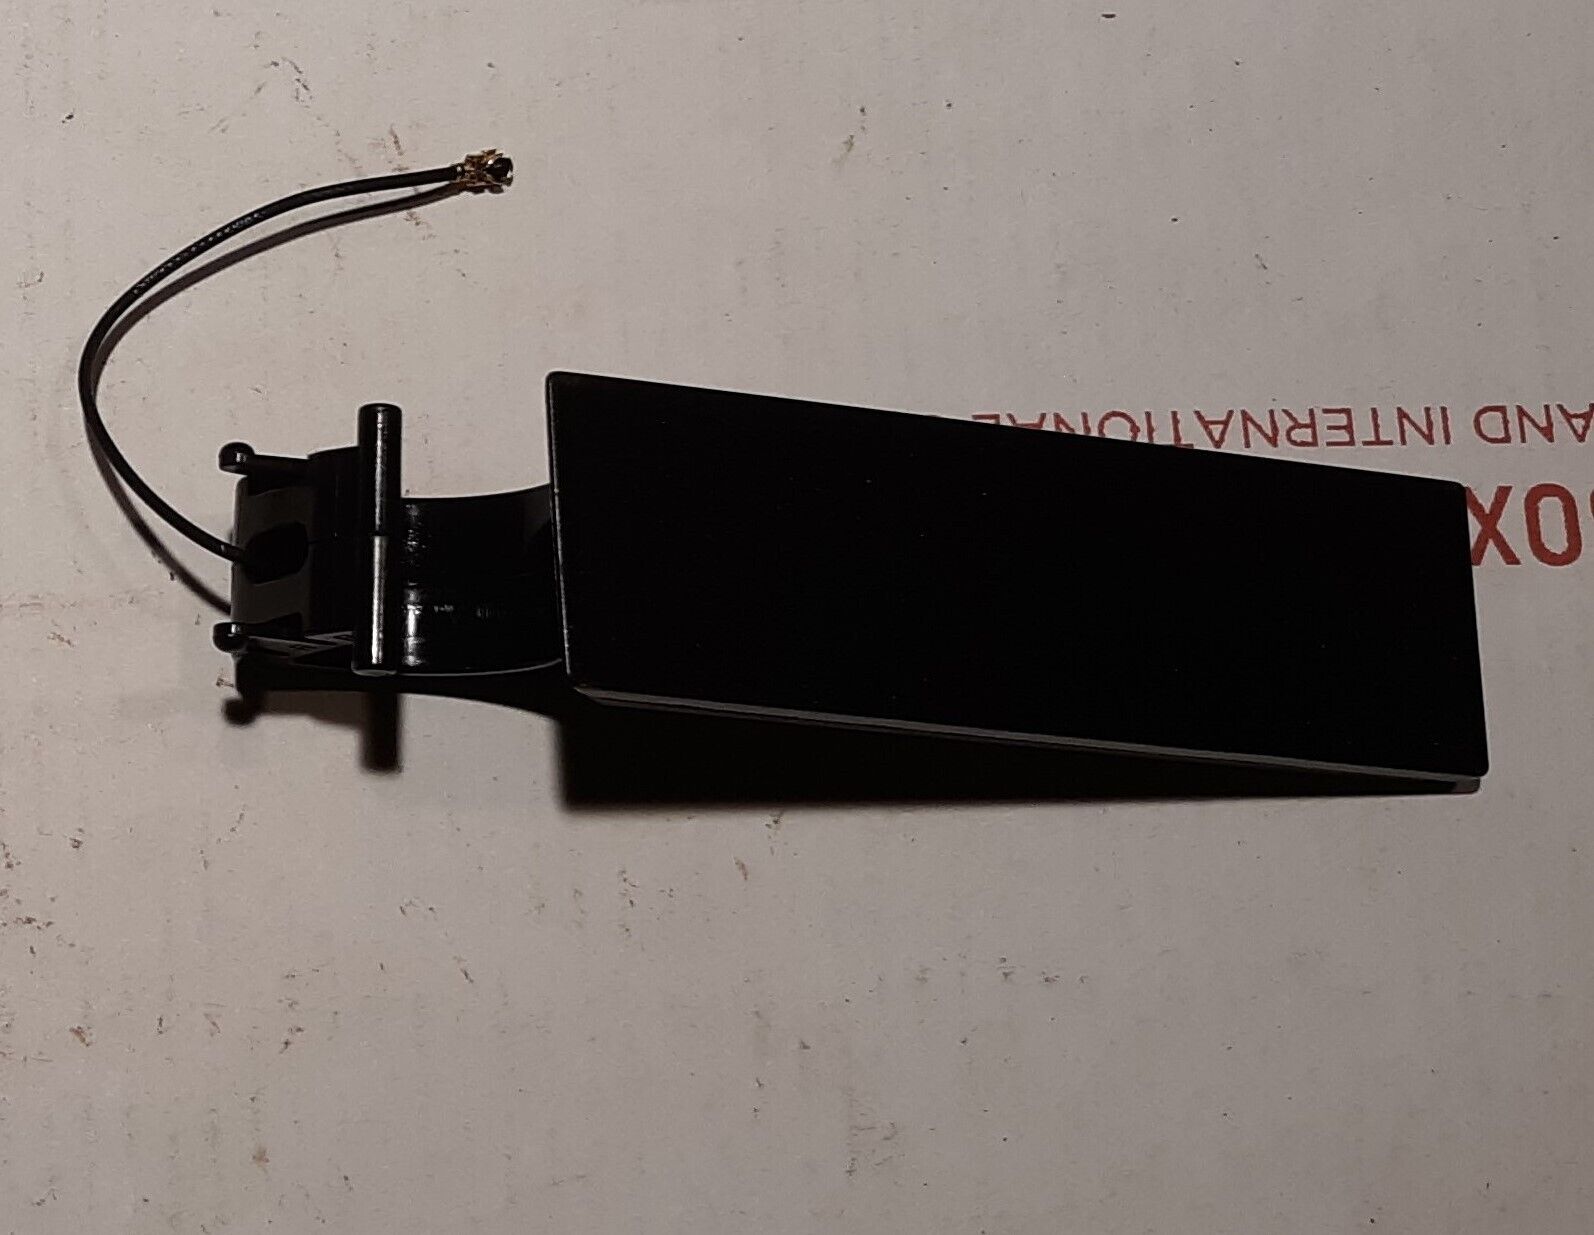 1 each, Genuine Top Fold Out Antenna for: Netgear Nighthawk X6 Router.